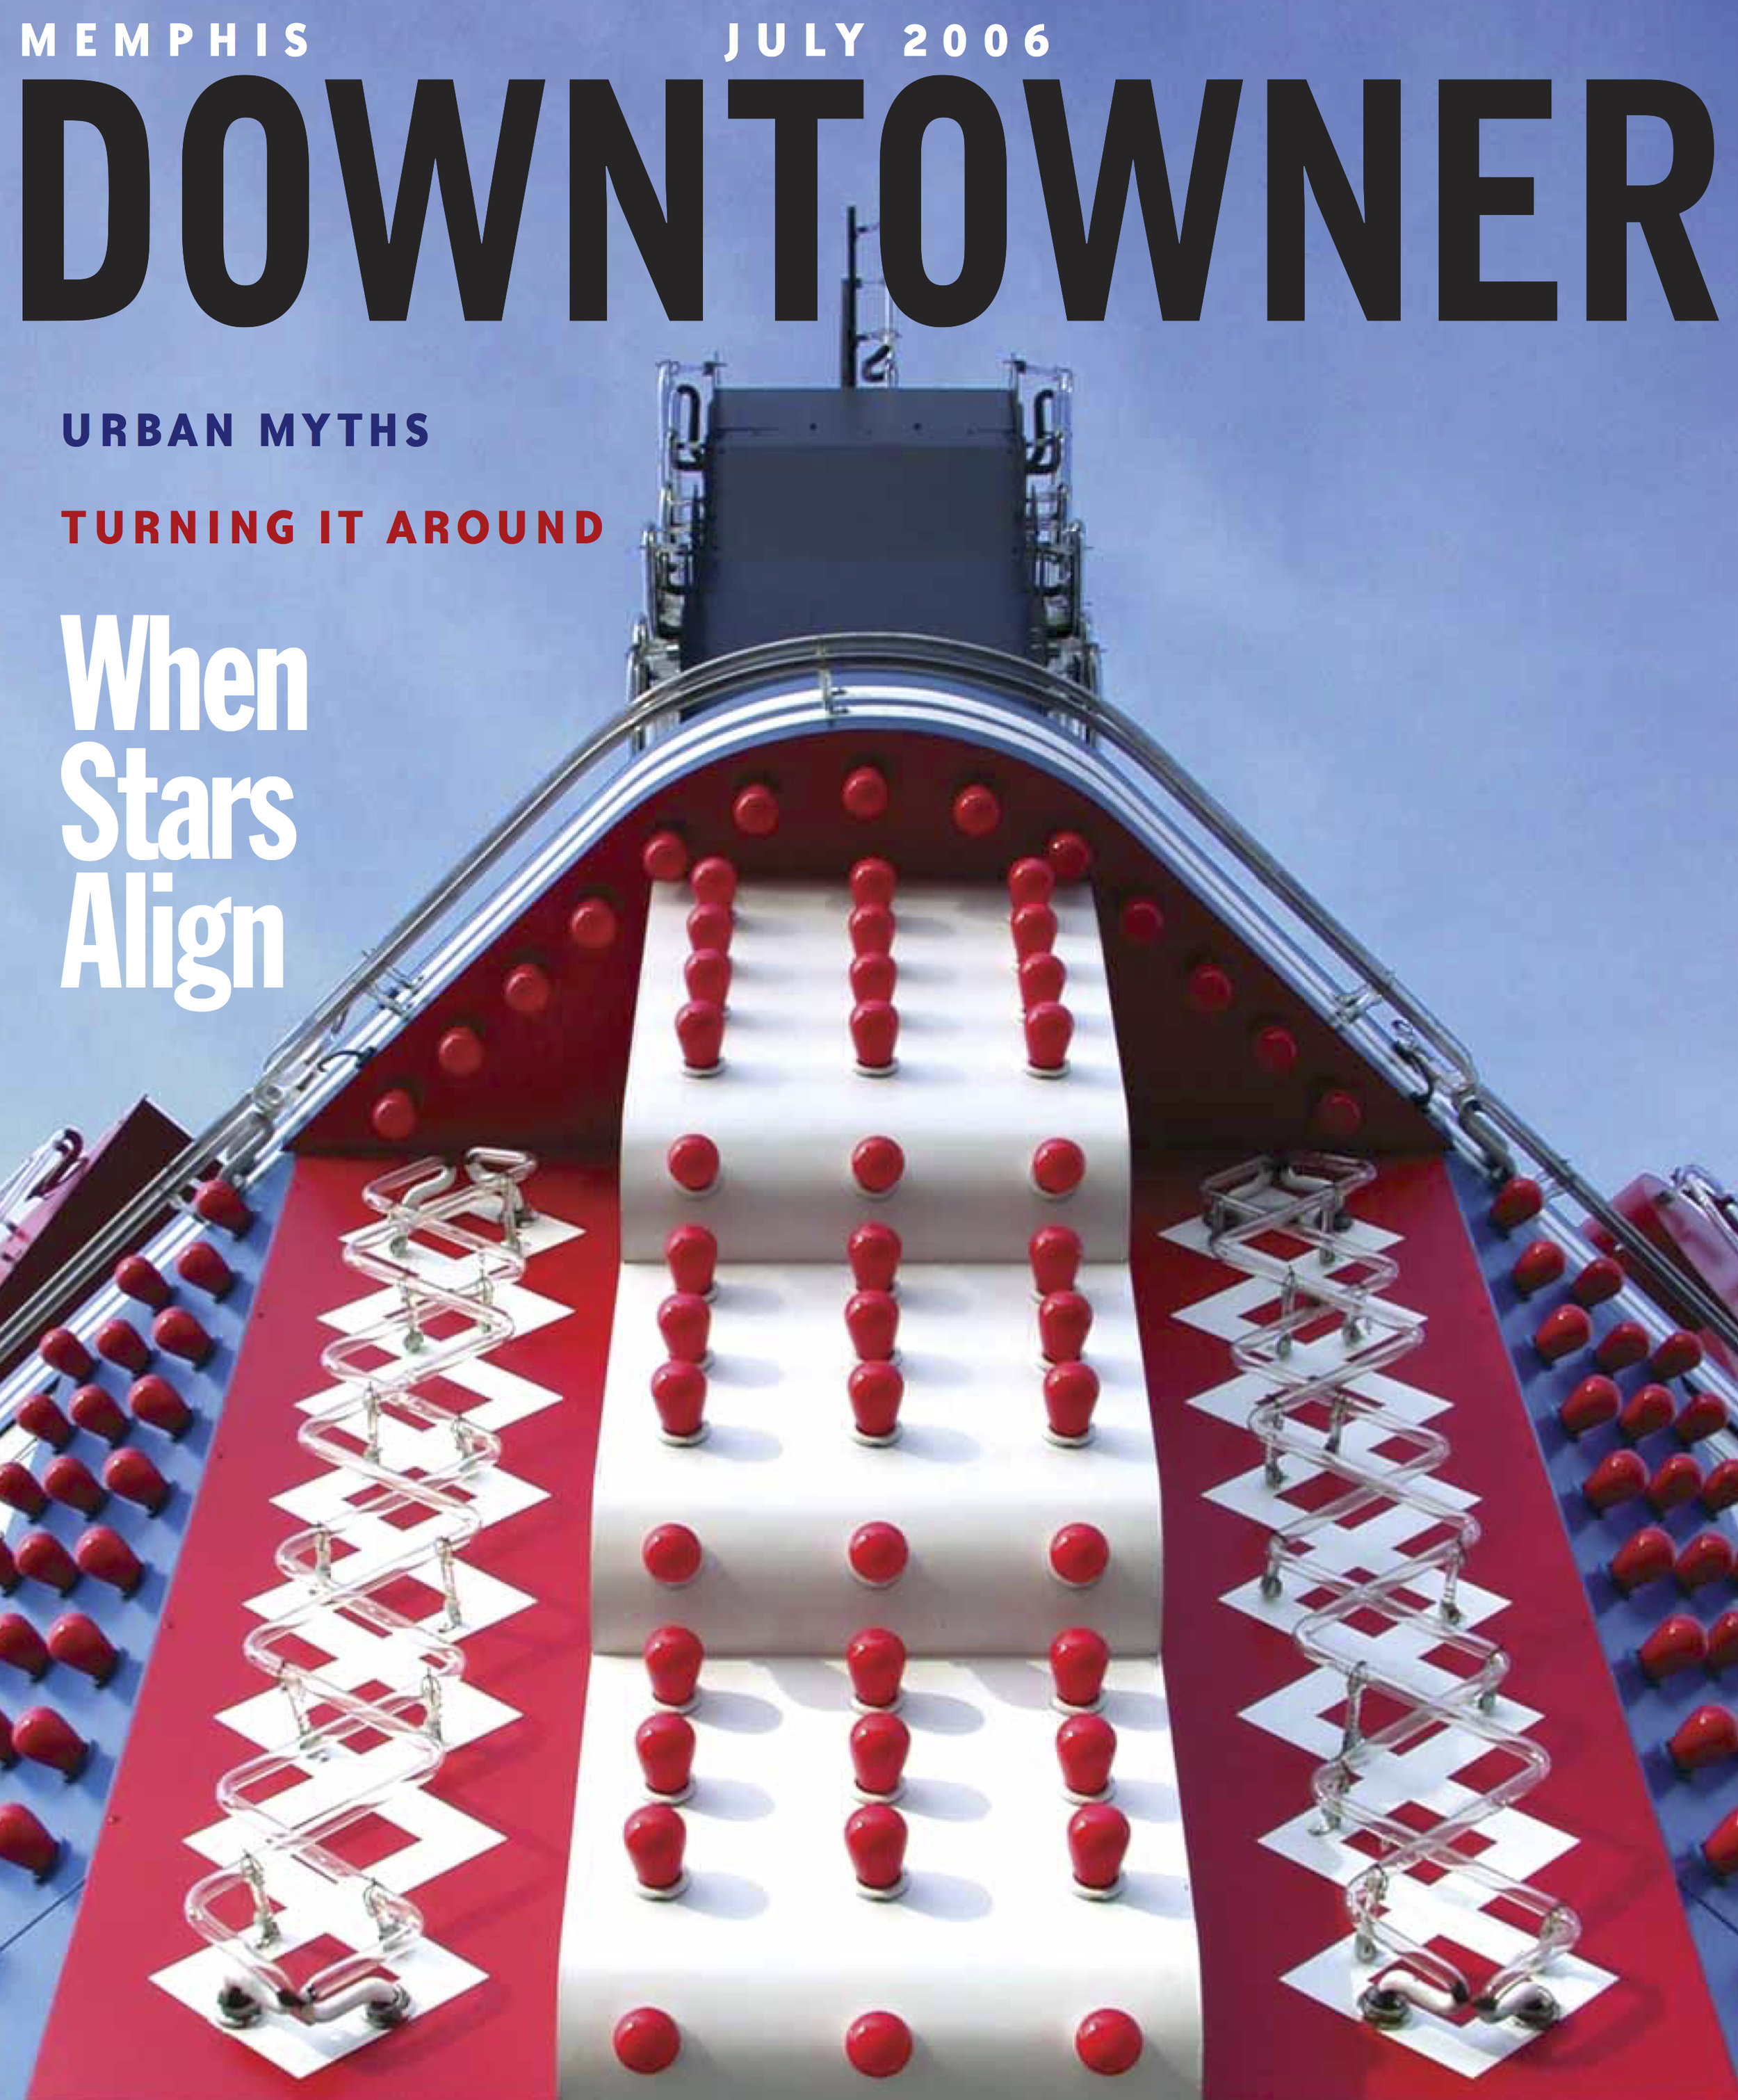  Memphis Downtowner Magazine  Stax Museum of American Soul Music  Publication design by Chuck Mitchell  Photograph by Chuck Mitchell 